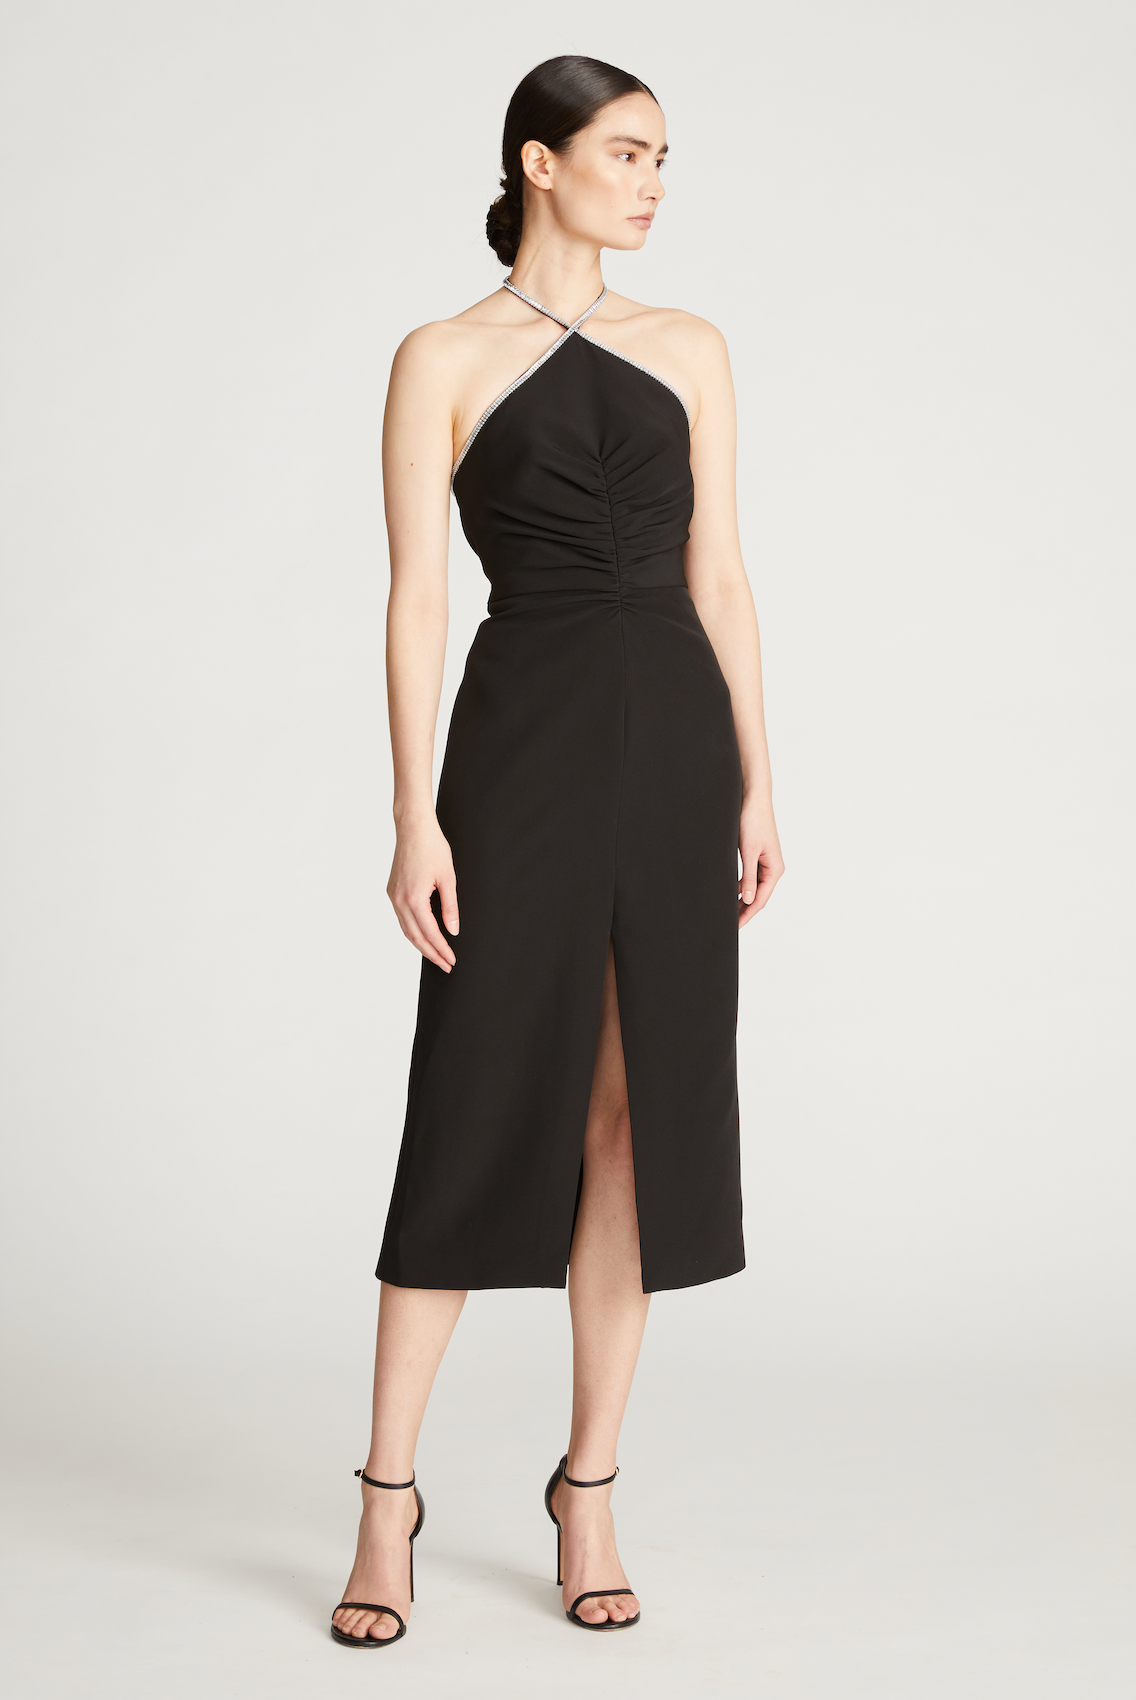 Piper Dress with Crystal Trim by Halston